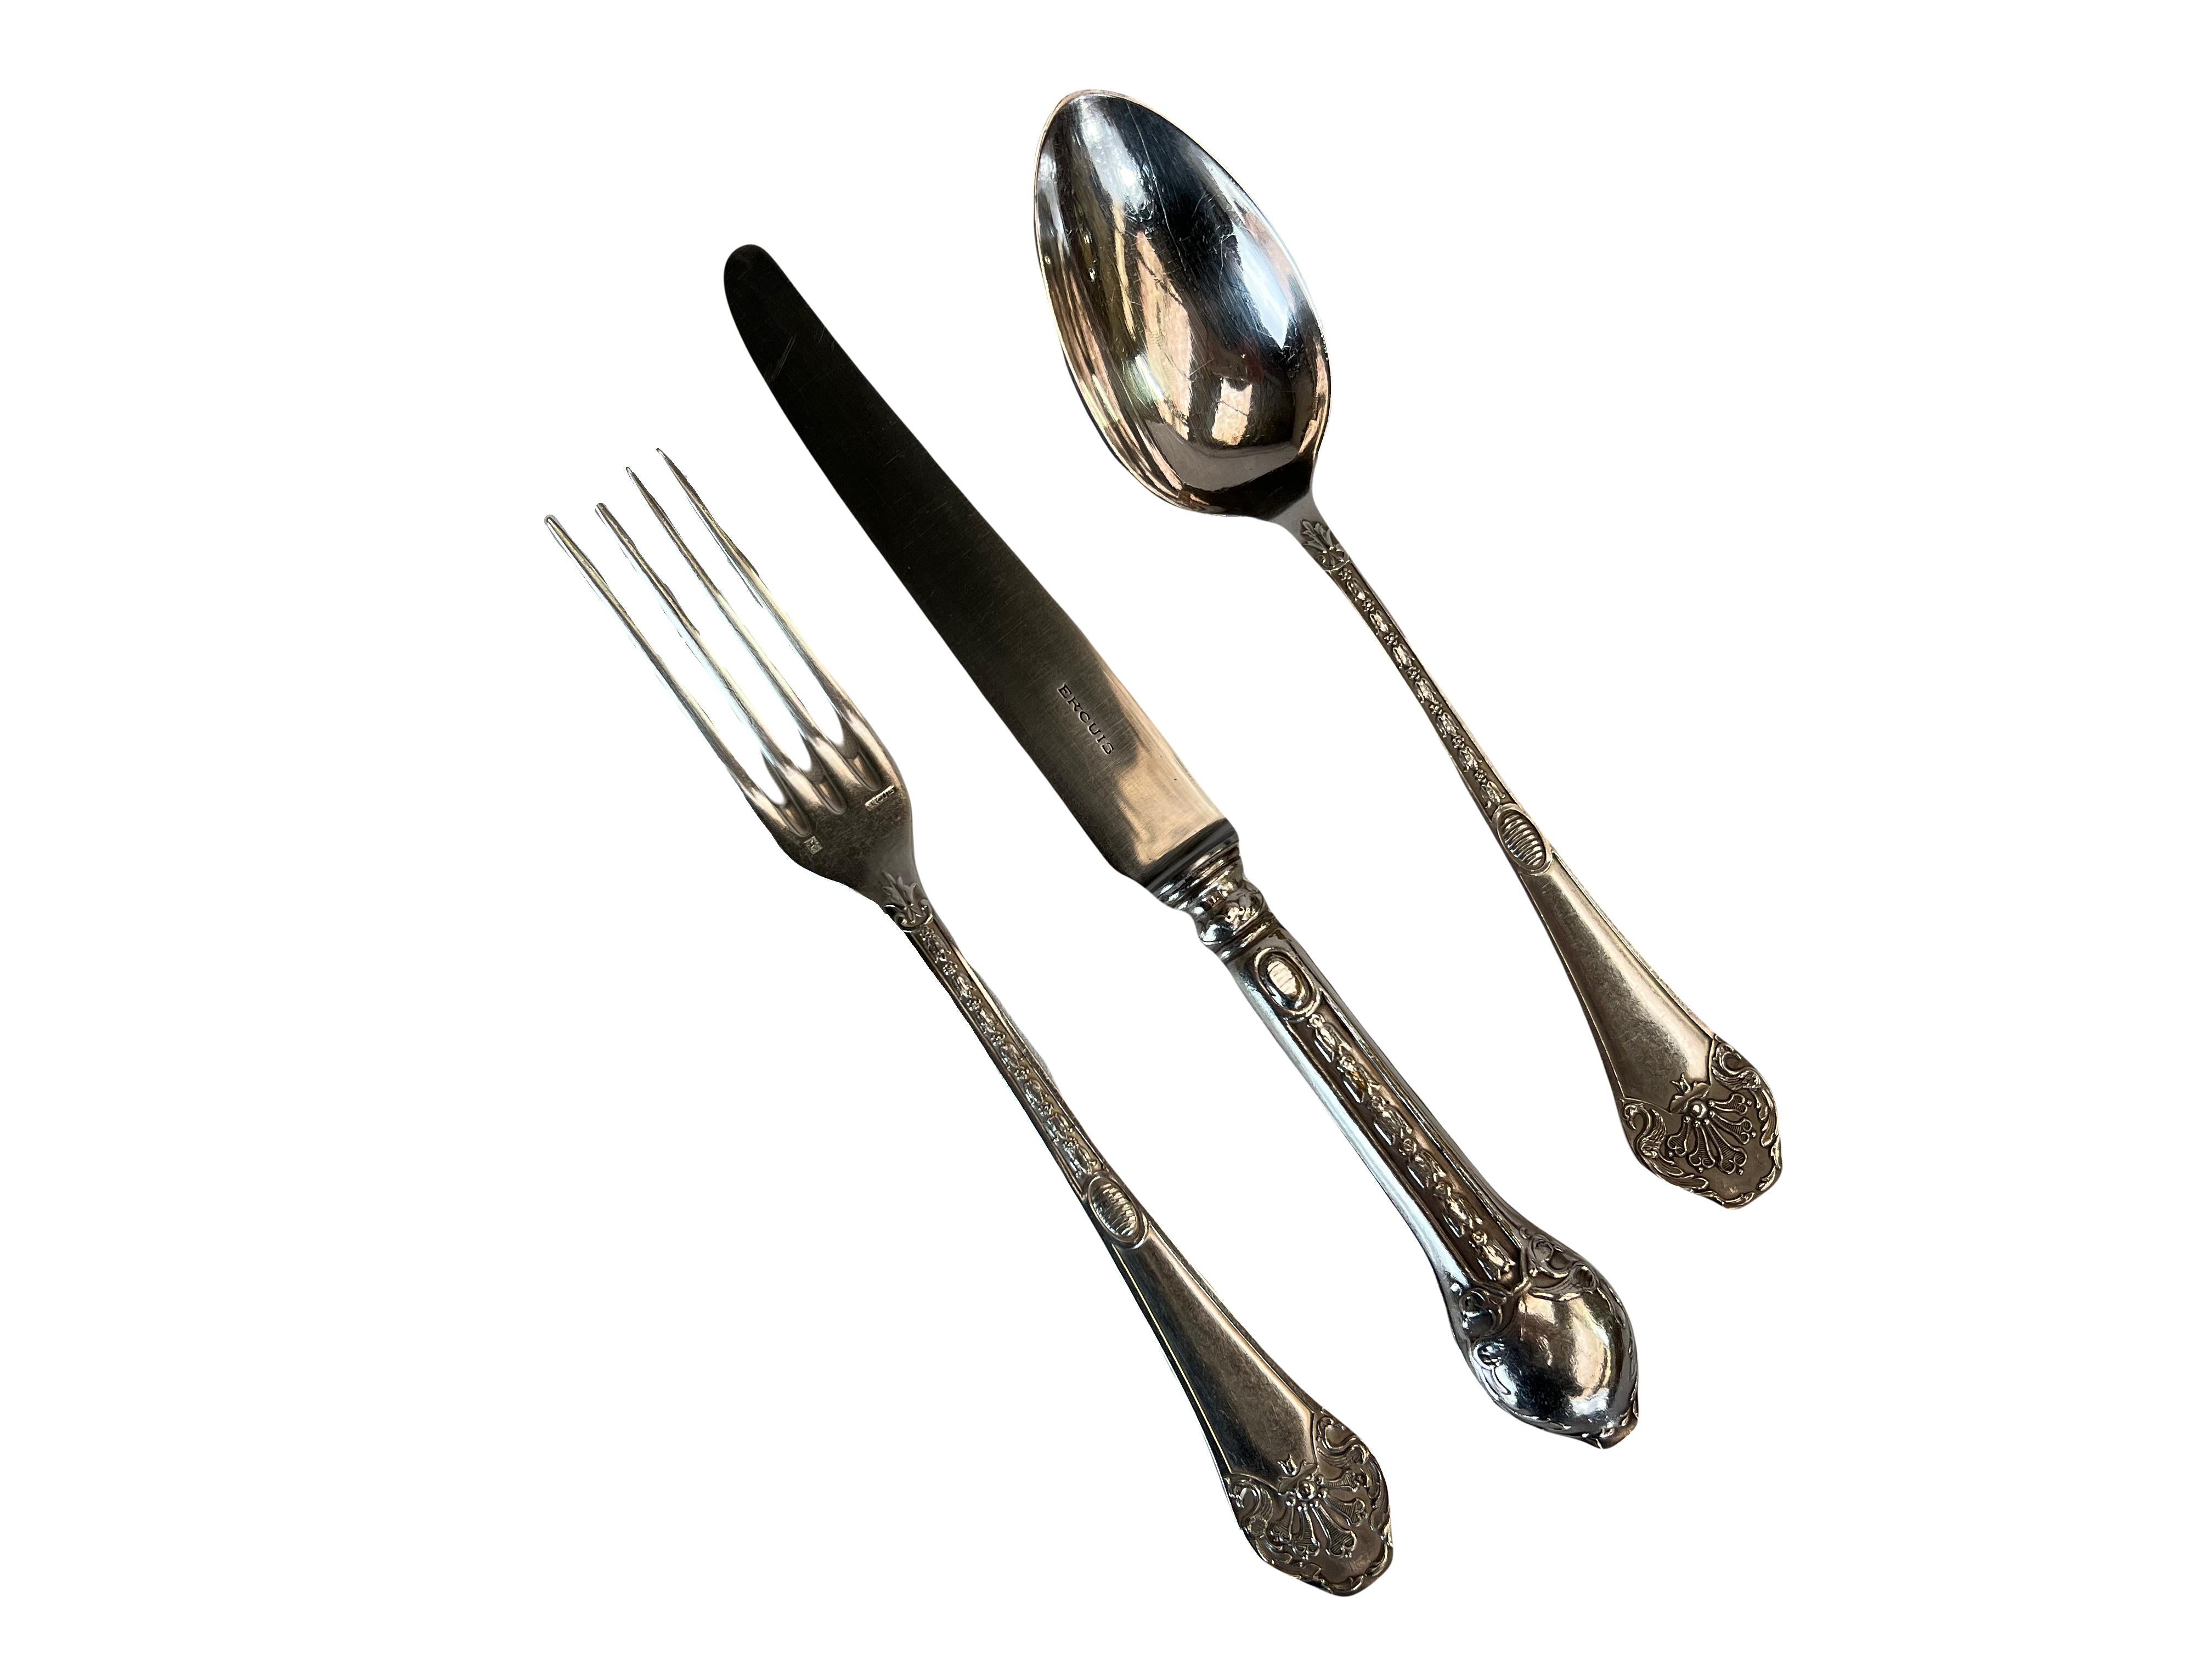 Silver-plated Ercuis Flatware Set - 124 Pieces

This Ercuis flatware set is presented in three cases, allowing for convenient storage. You can easily stow it in your dresser drawers or cabinet and move it as you please to set a beautiful